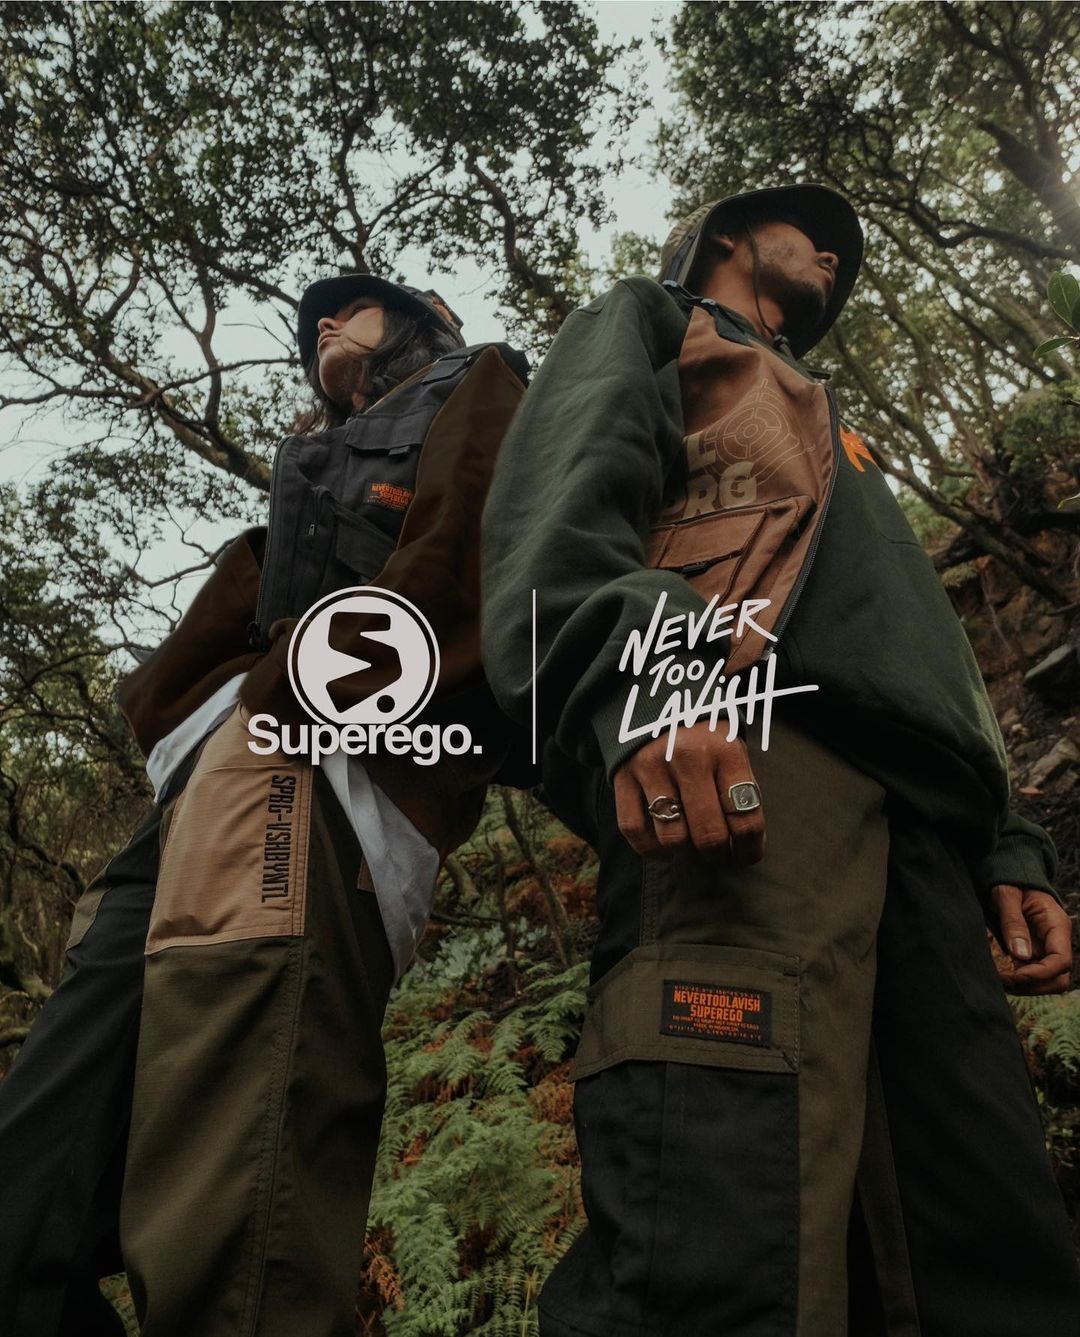 Check out Nevertoolavish x Superego inspired by military and street art!